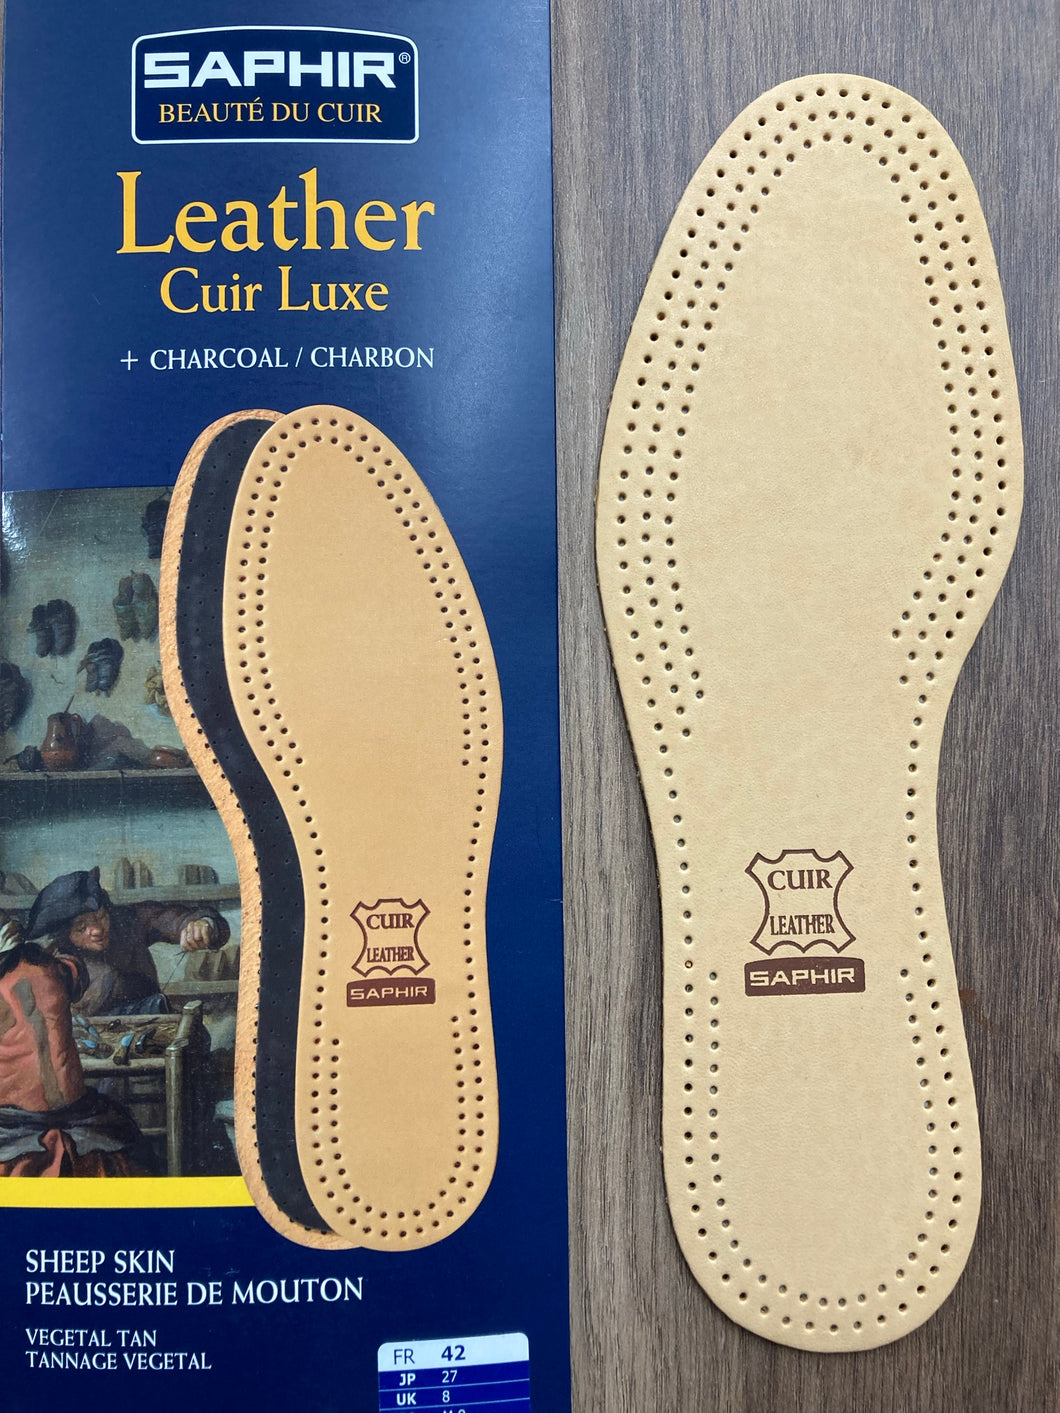 Saphir luxury leather insoles